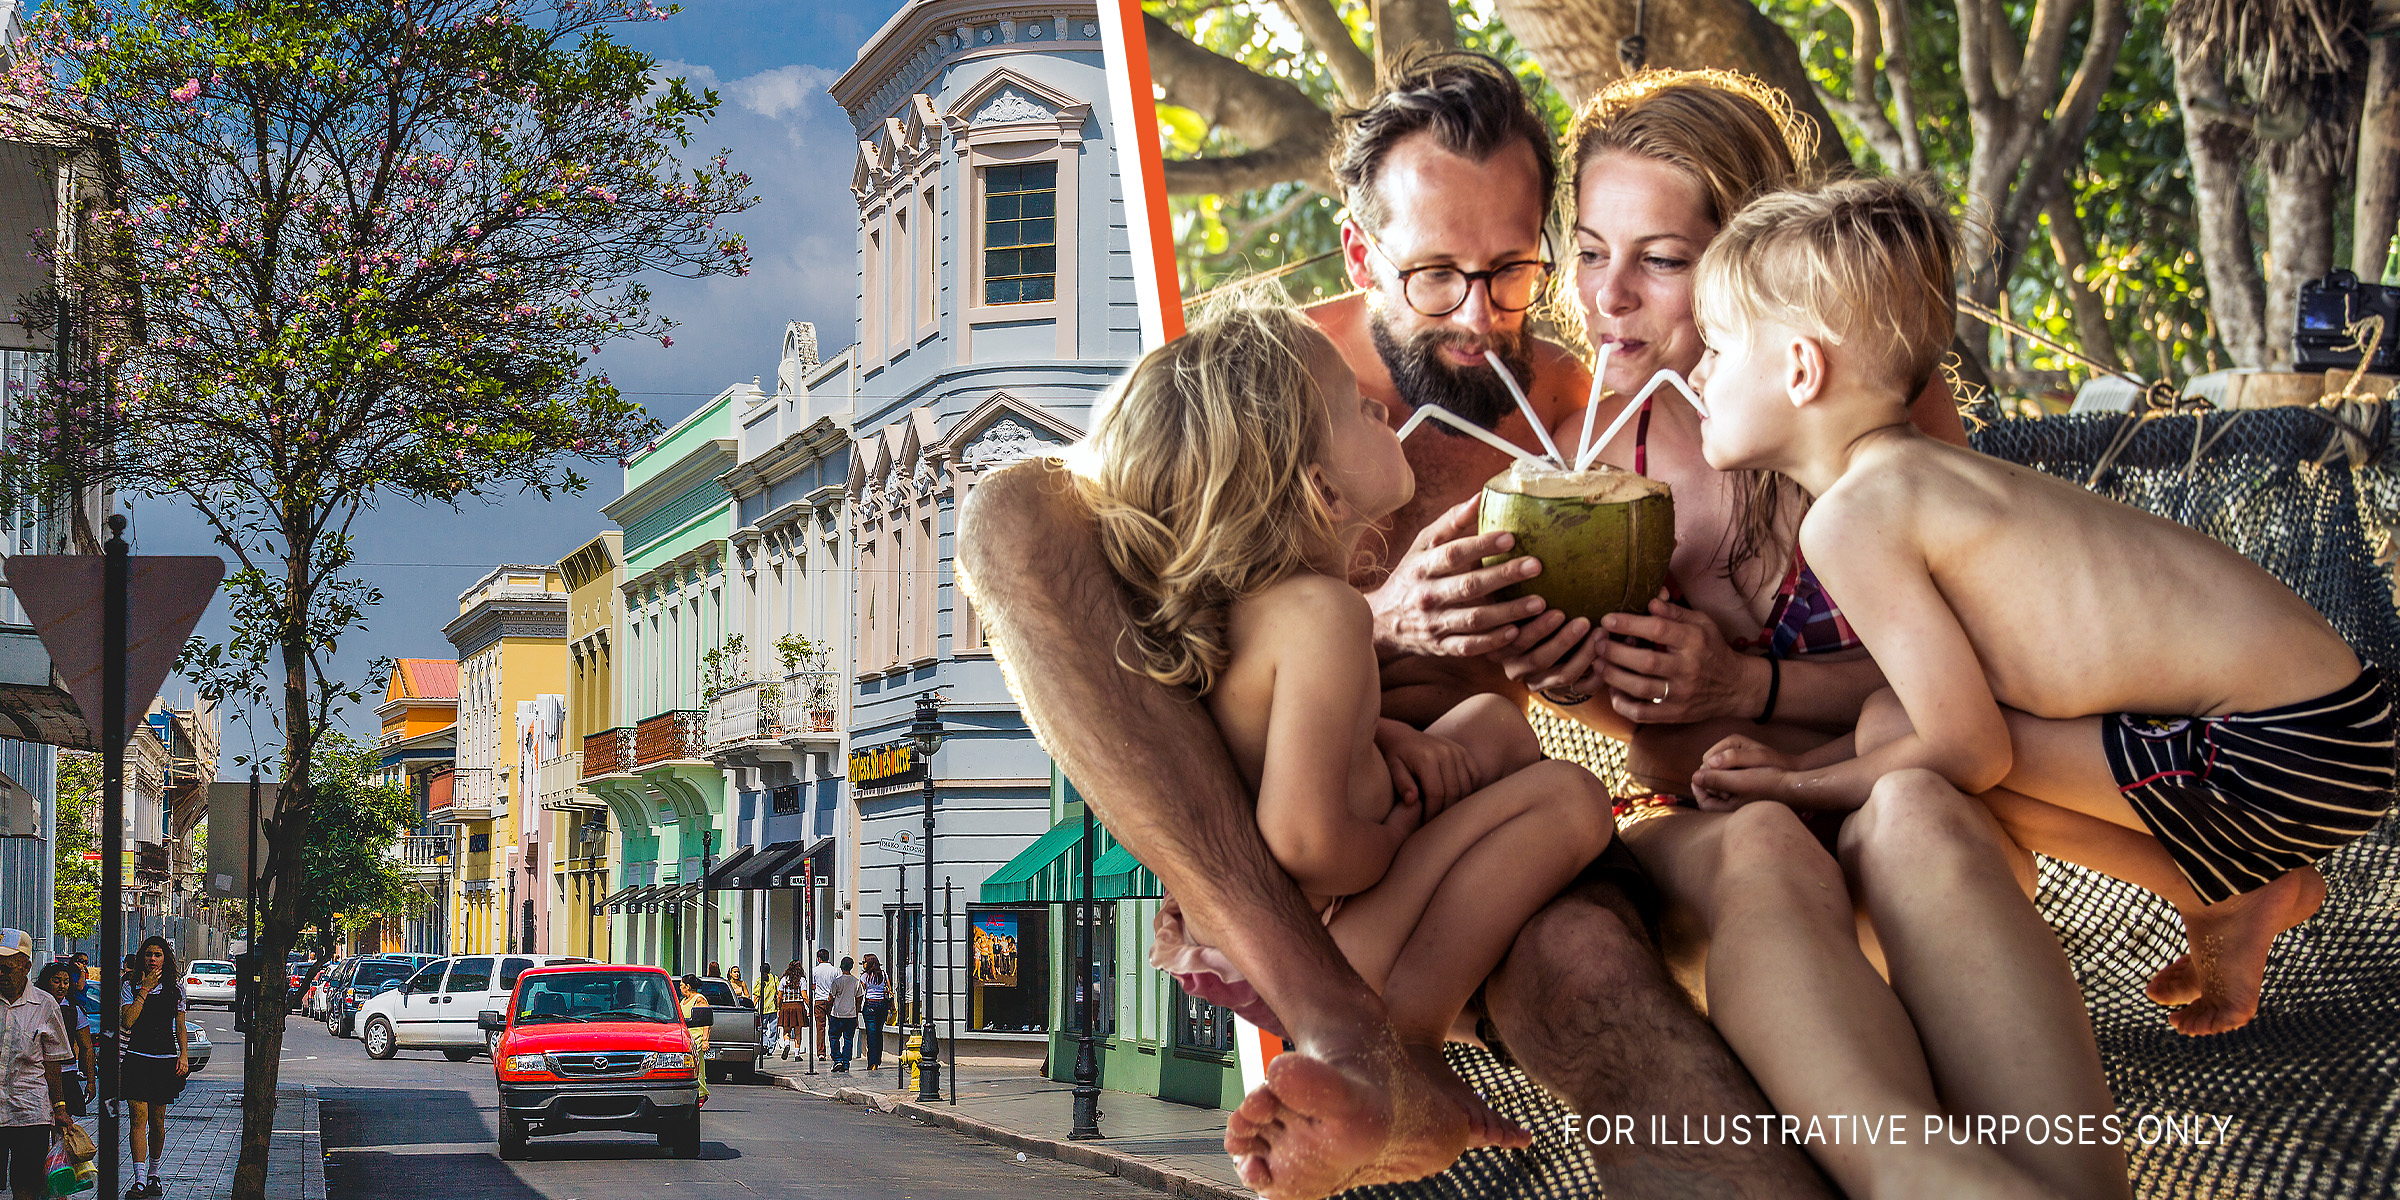 Puerto Rico | A family on vacation drinking out of a coconut | Source: Getty Images